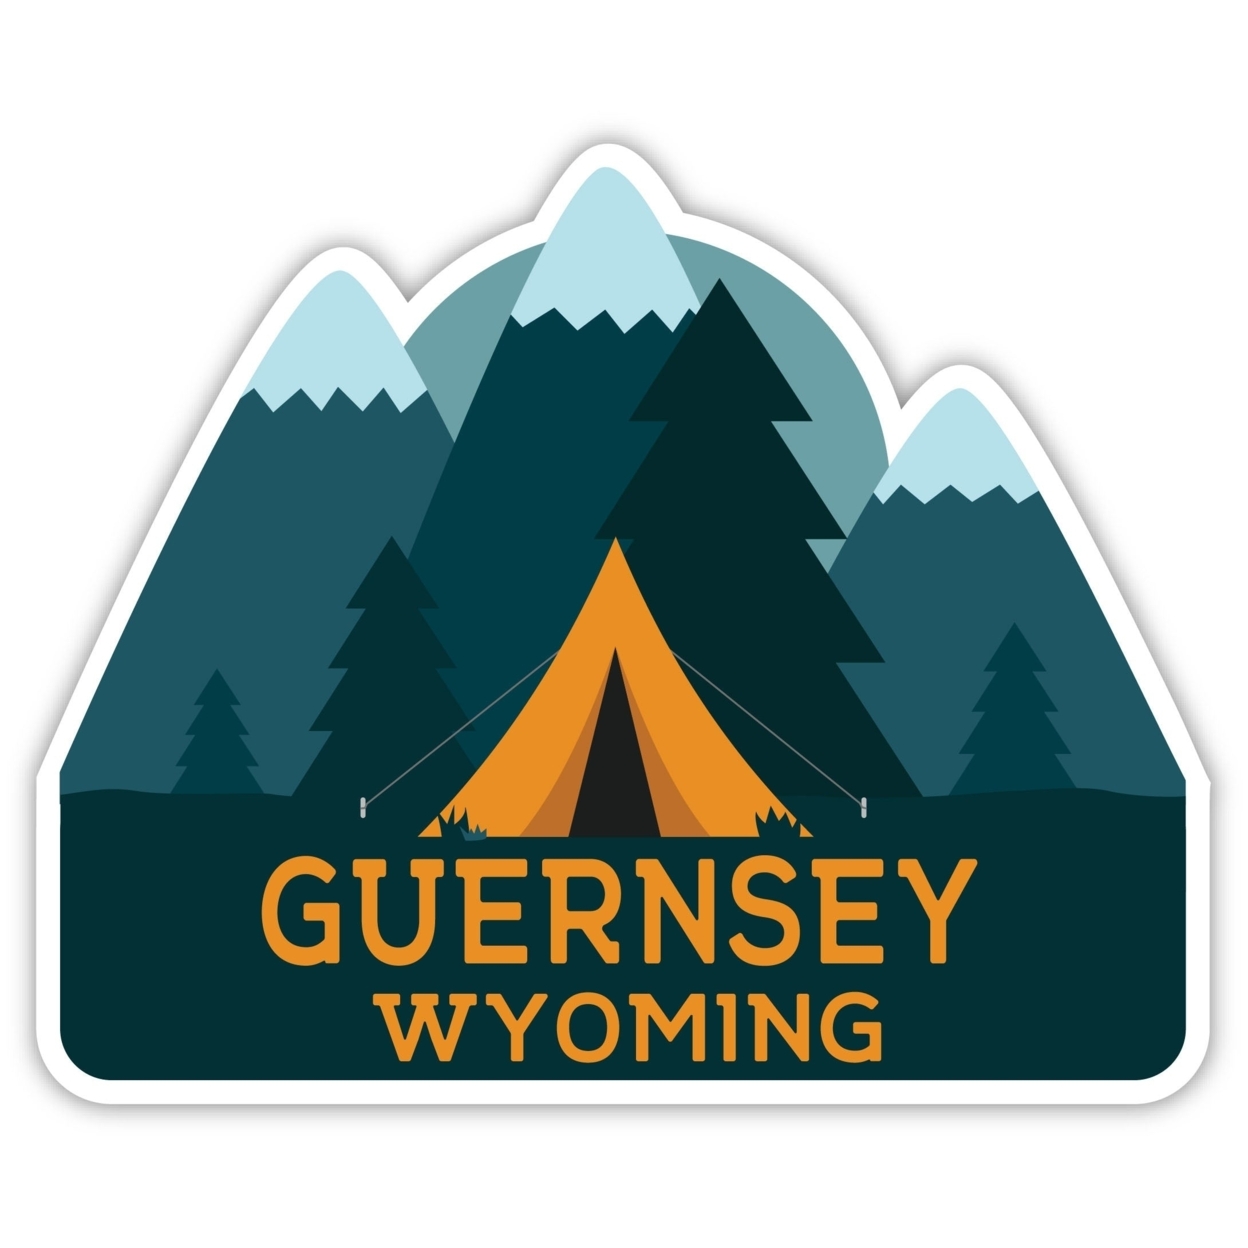 Guernsey Wyoming Souvenir Decorative Stickers (Choose Theme And Size) - 4-Pack, 10-Inch, Tent